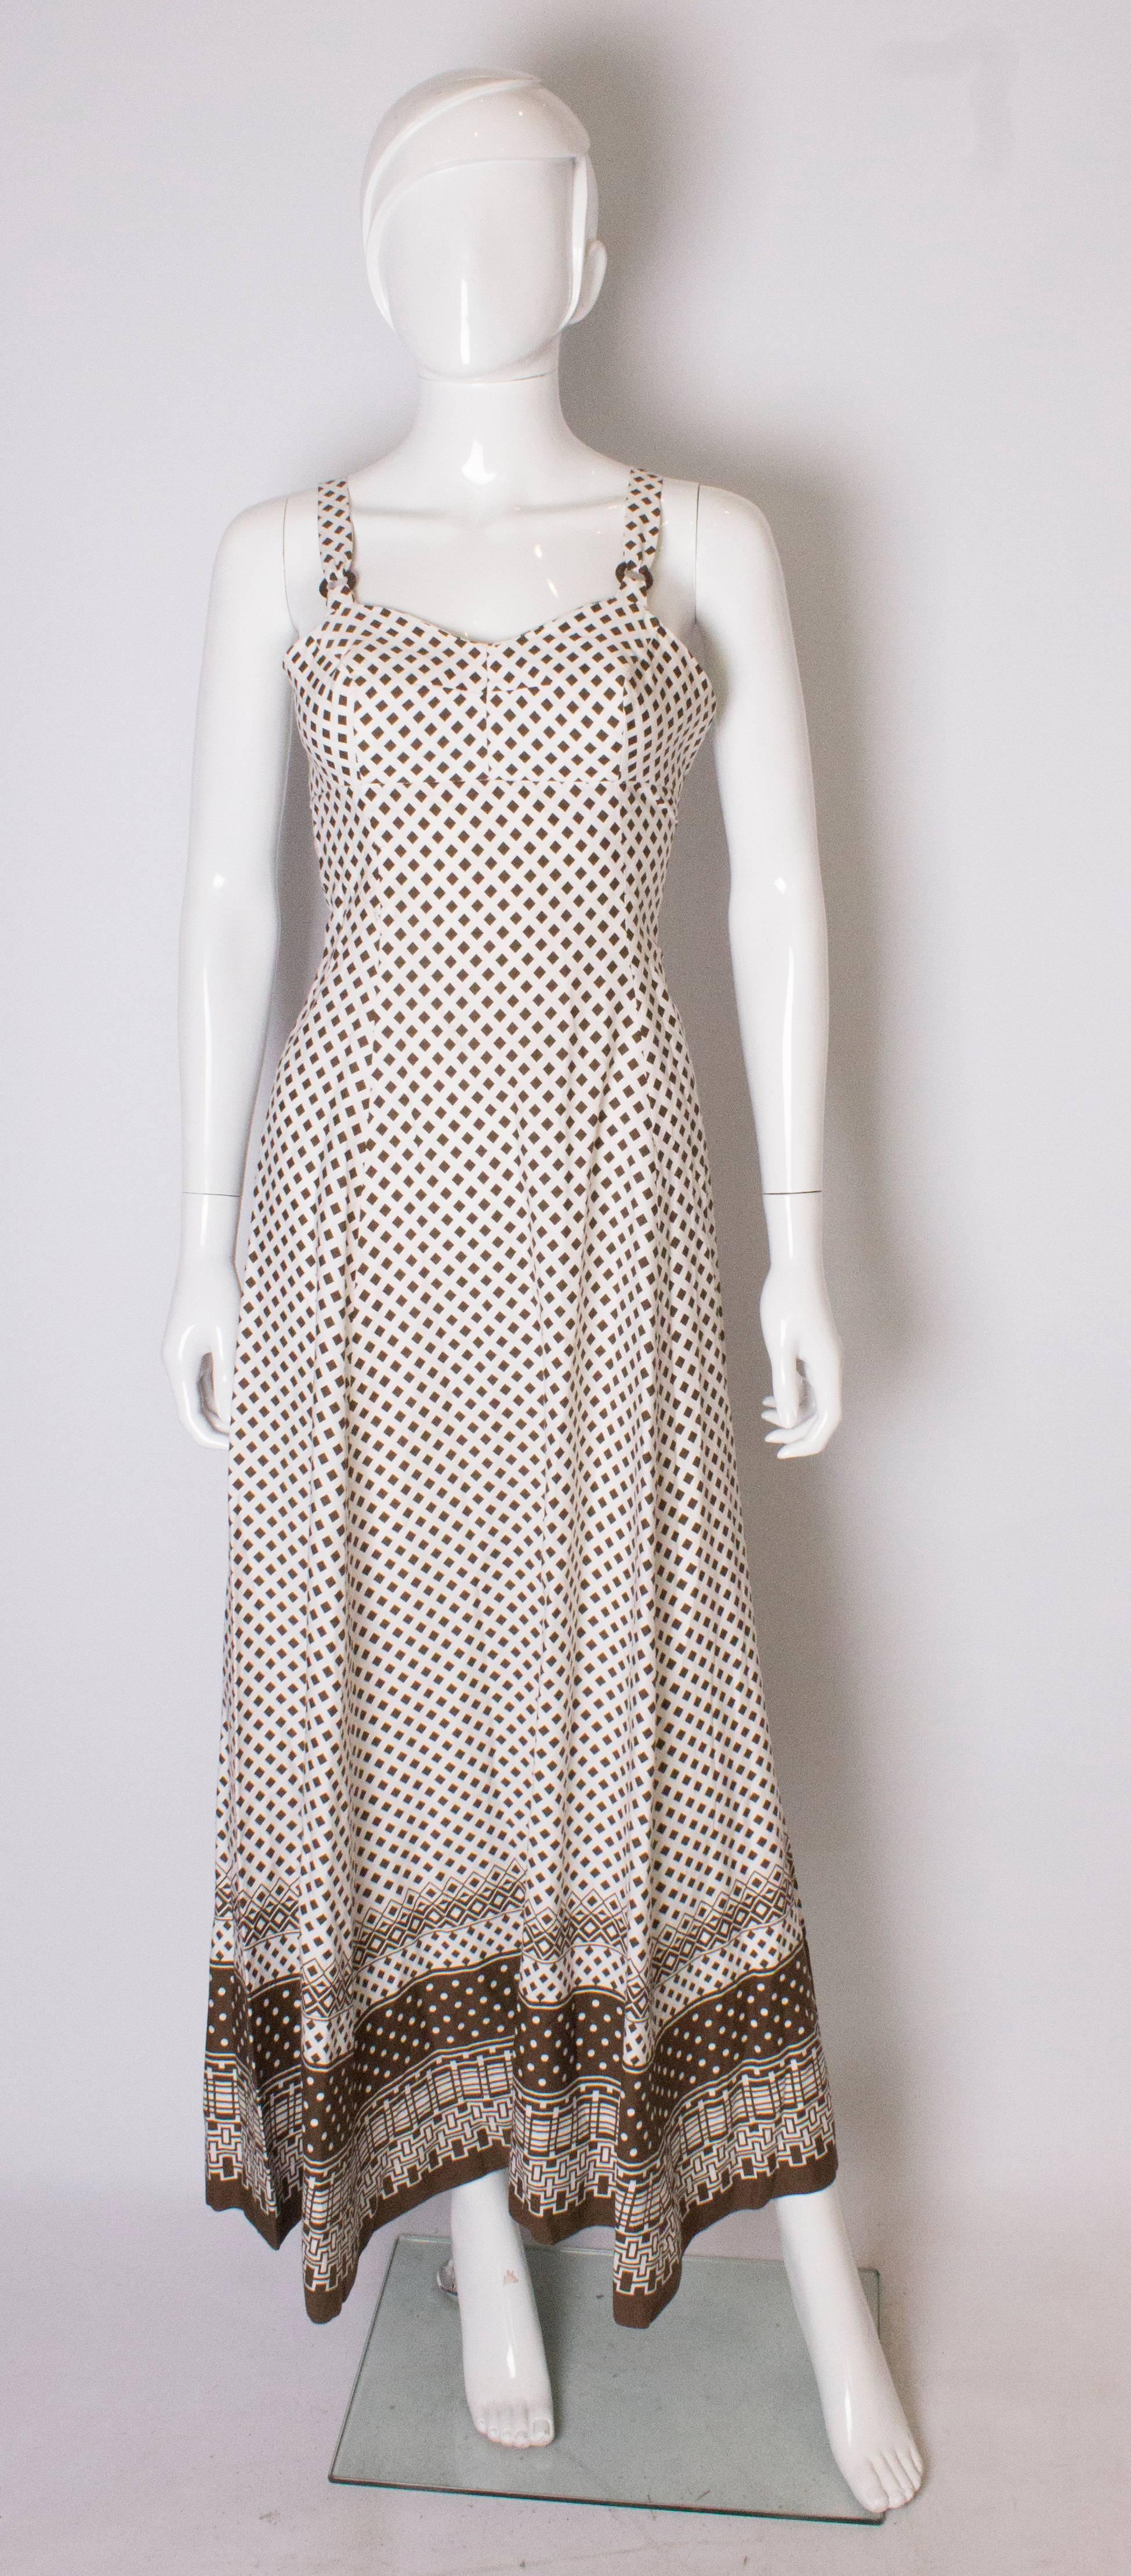 A chic gown for Summer by British firm, Horrockses. In a brown and white print, the dress has wide shoulder straps with decorative ring detail, and a decorative boarder at the hem. The dress has a side zip.